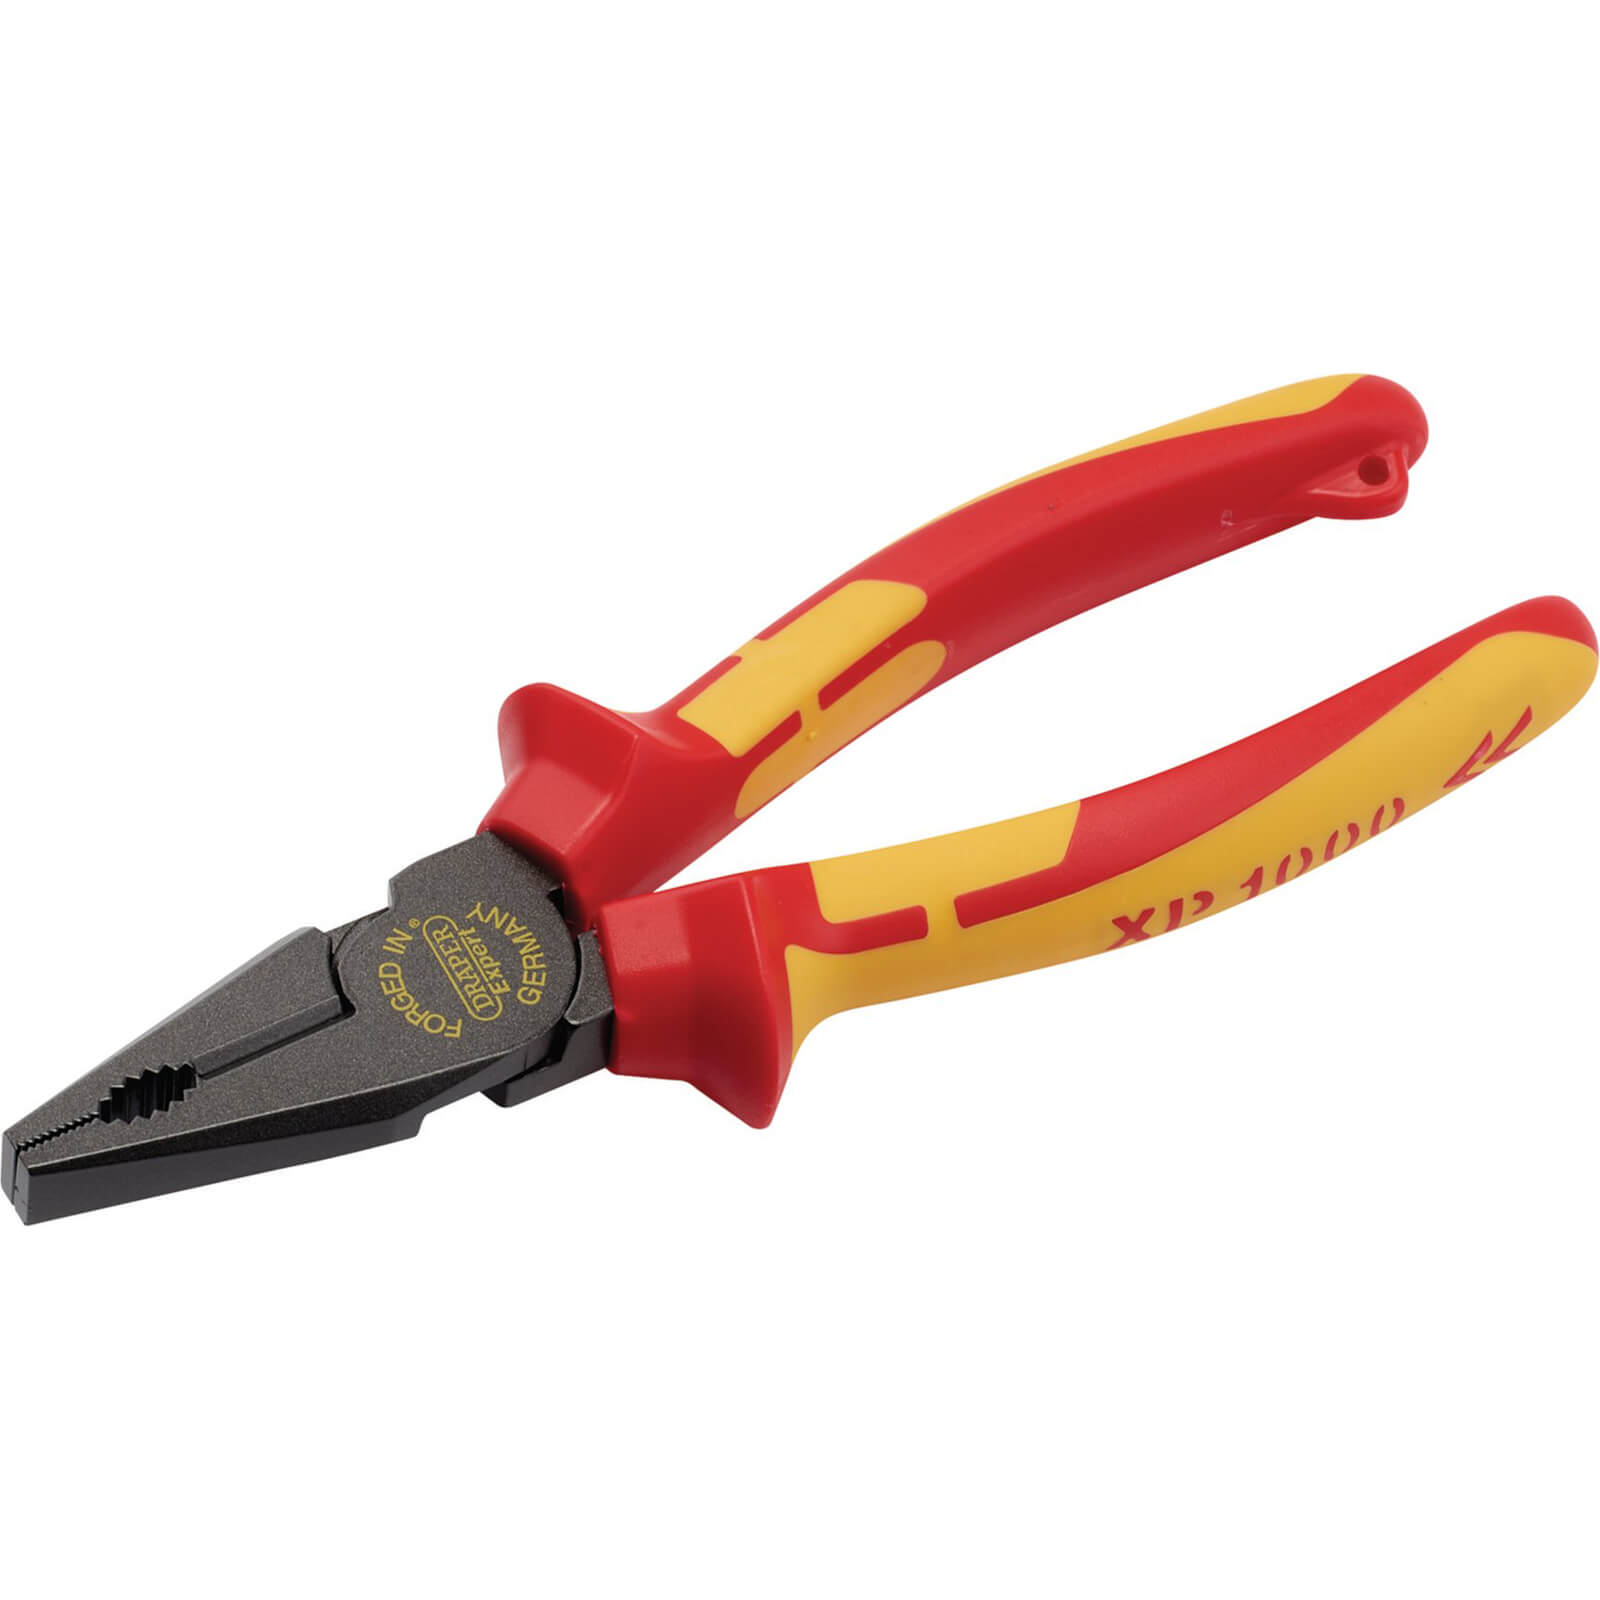 Draper XP1000 VDE Tethered High Leverage Combination Pliers 180mm